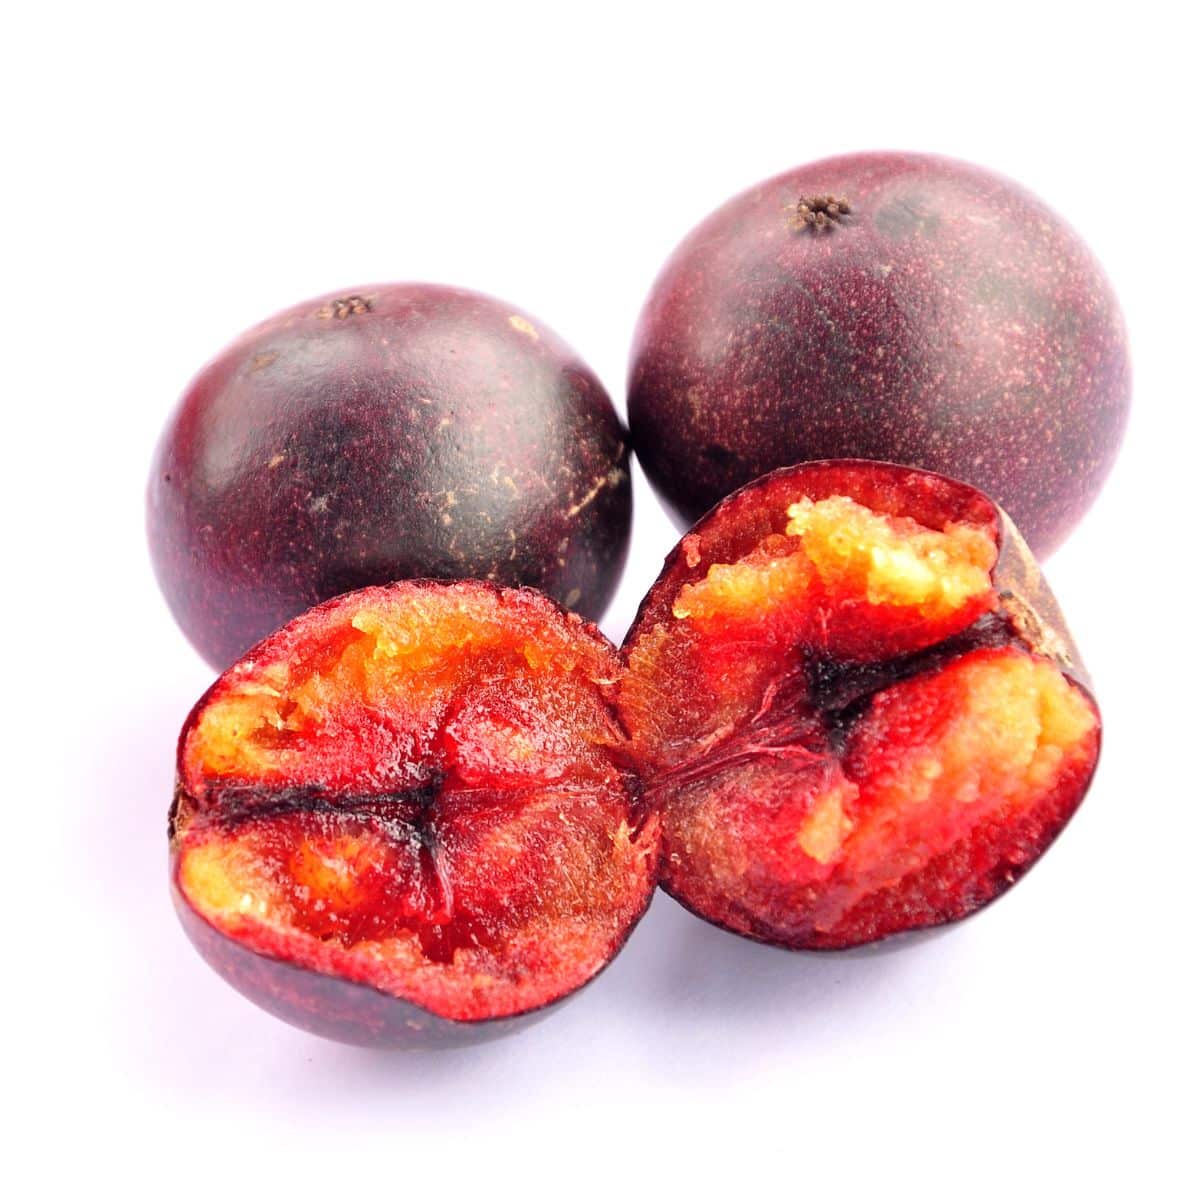 Governors plums on a white background.